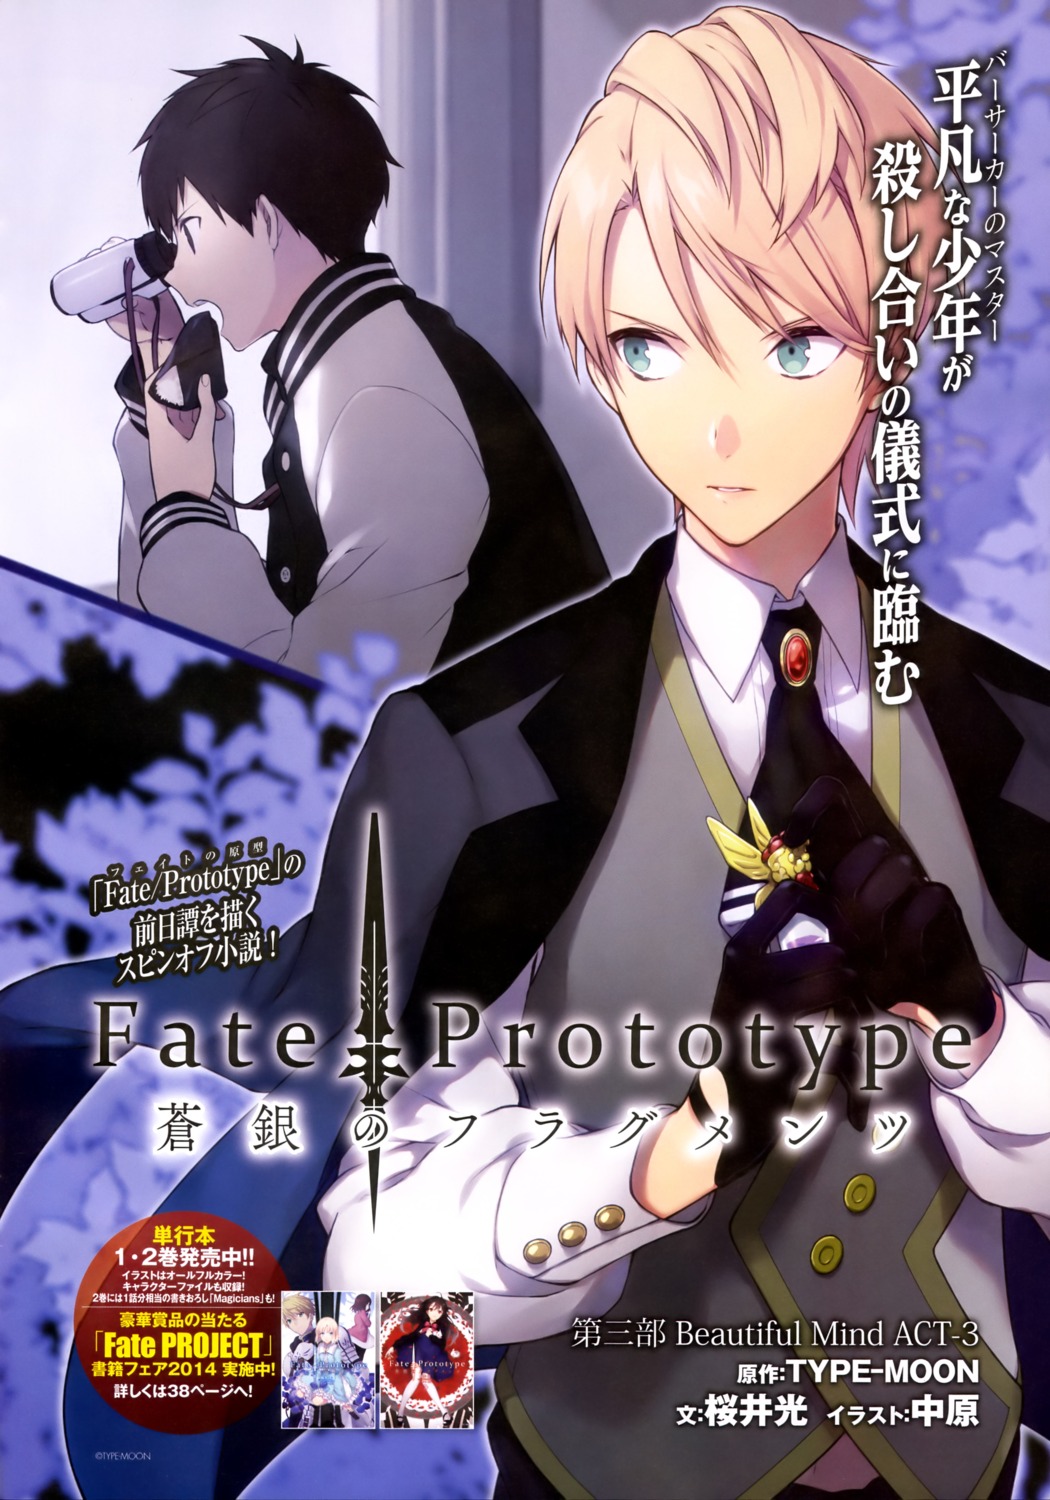 fate/prototype fate/prototype:_fragments_of_blue_and_silver fate/stay_night nakahara type-moon